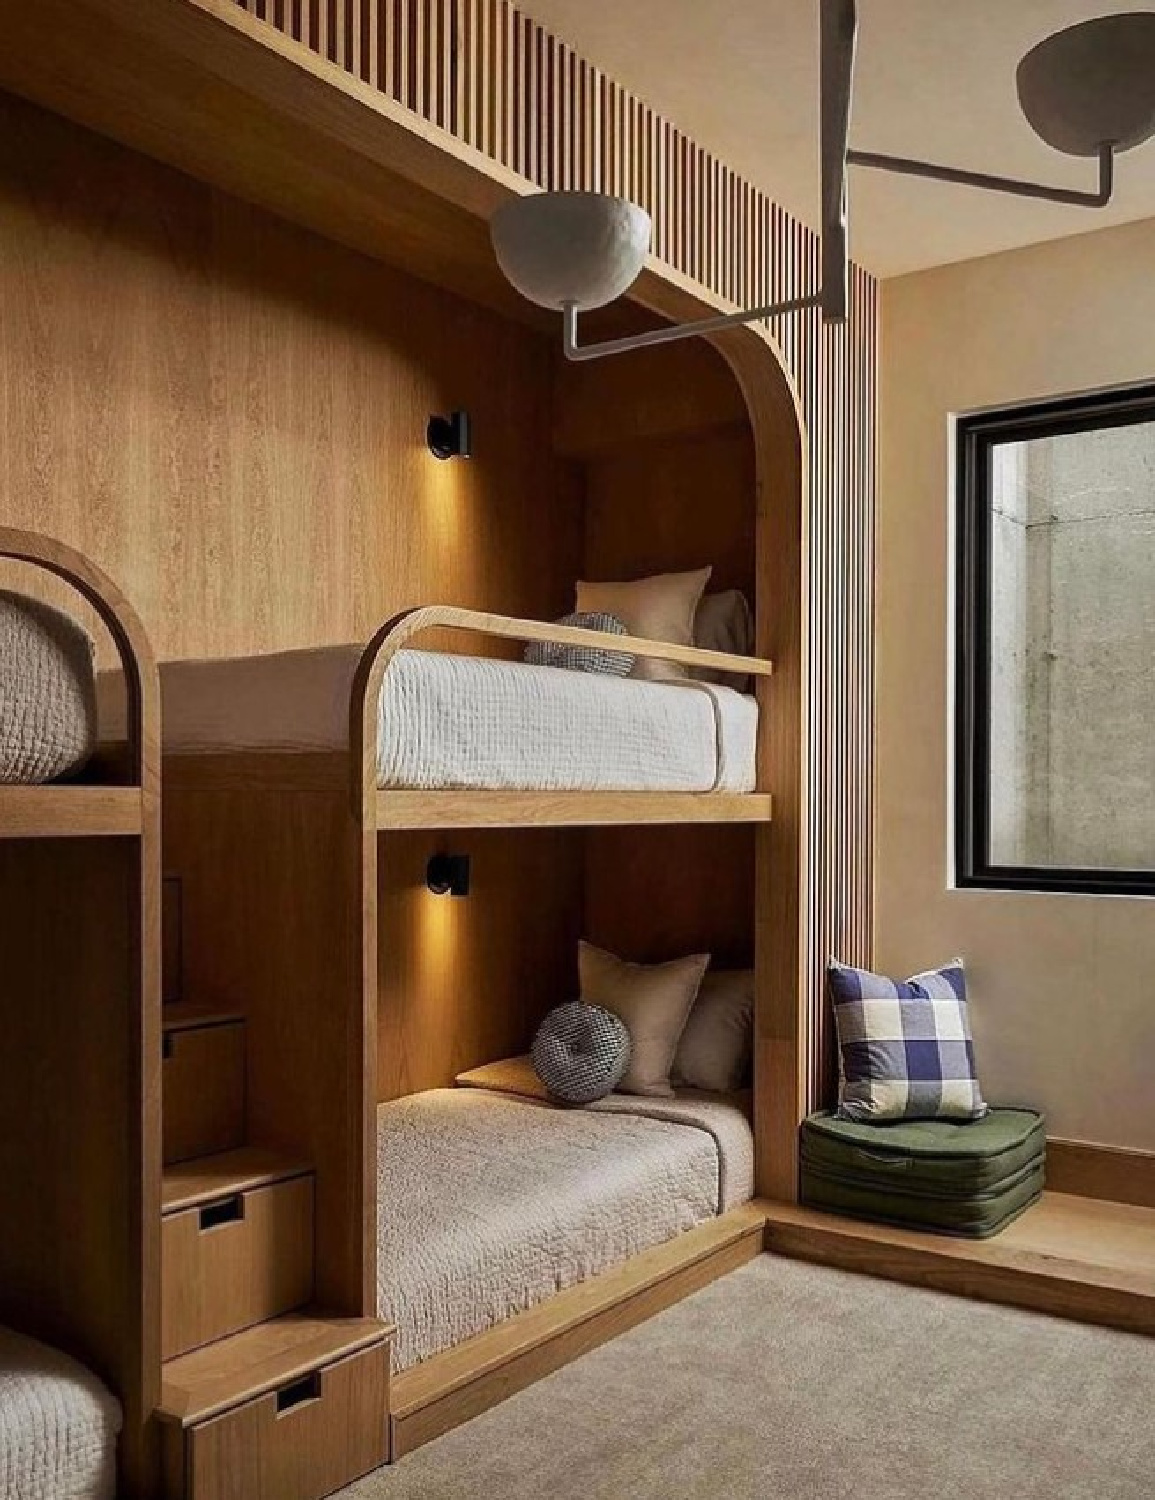 John Martine Studio designed bedroom with built in bunk beds (Photo by Liss Mabey). #bunkbeds